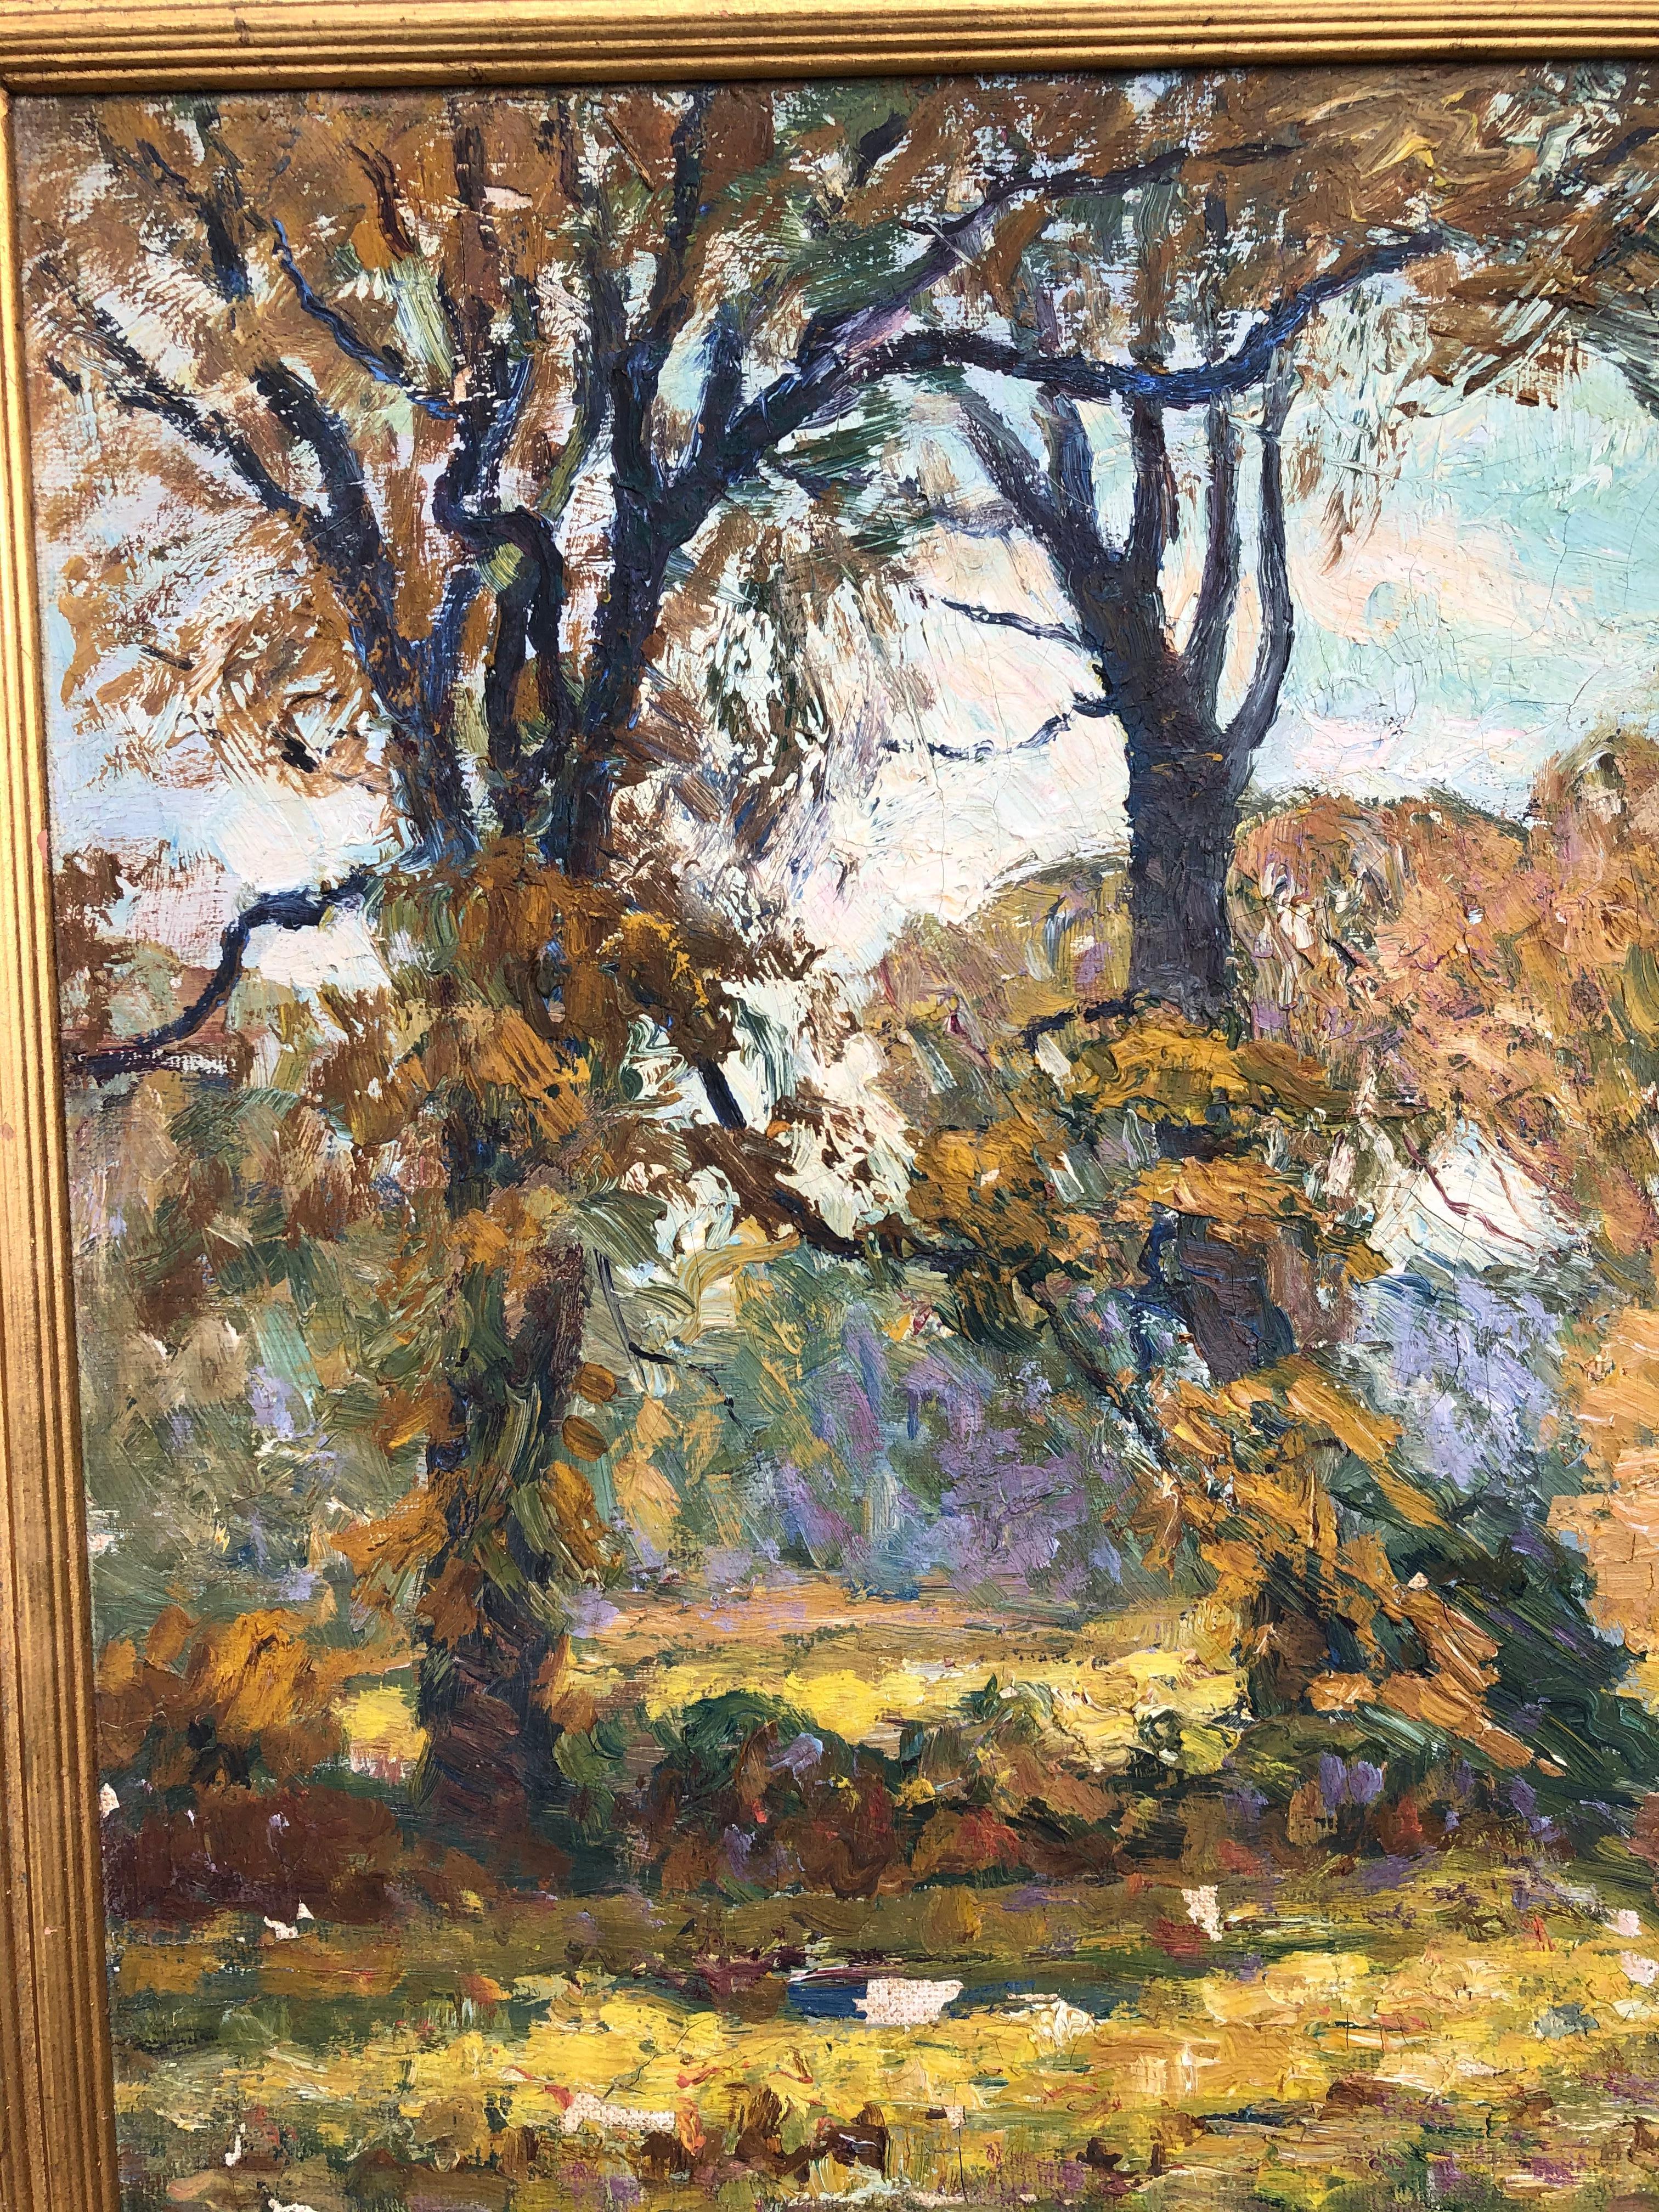 Bit of a mystery here. Fabulous American impressionist landscape appears to be unsigned. It is titled on the back old friends which I assume refers to the trees. I heavy impasto and broken brushstrokes make this a really well done New England